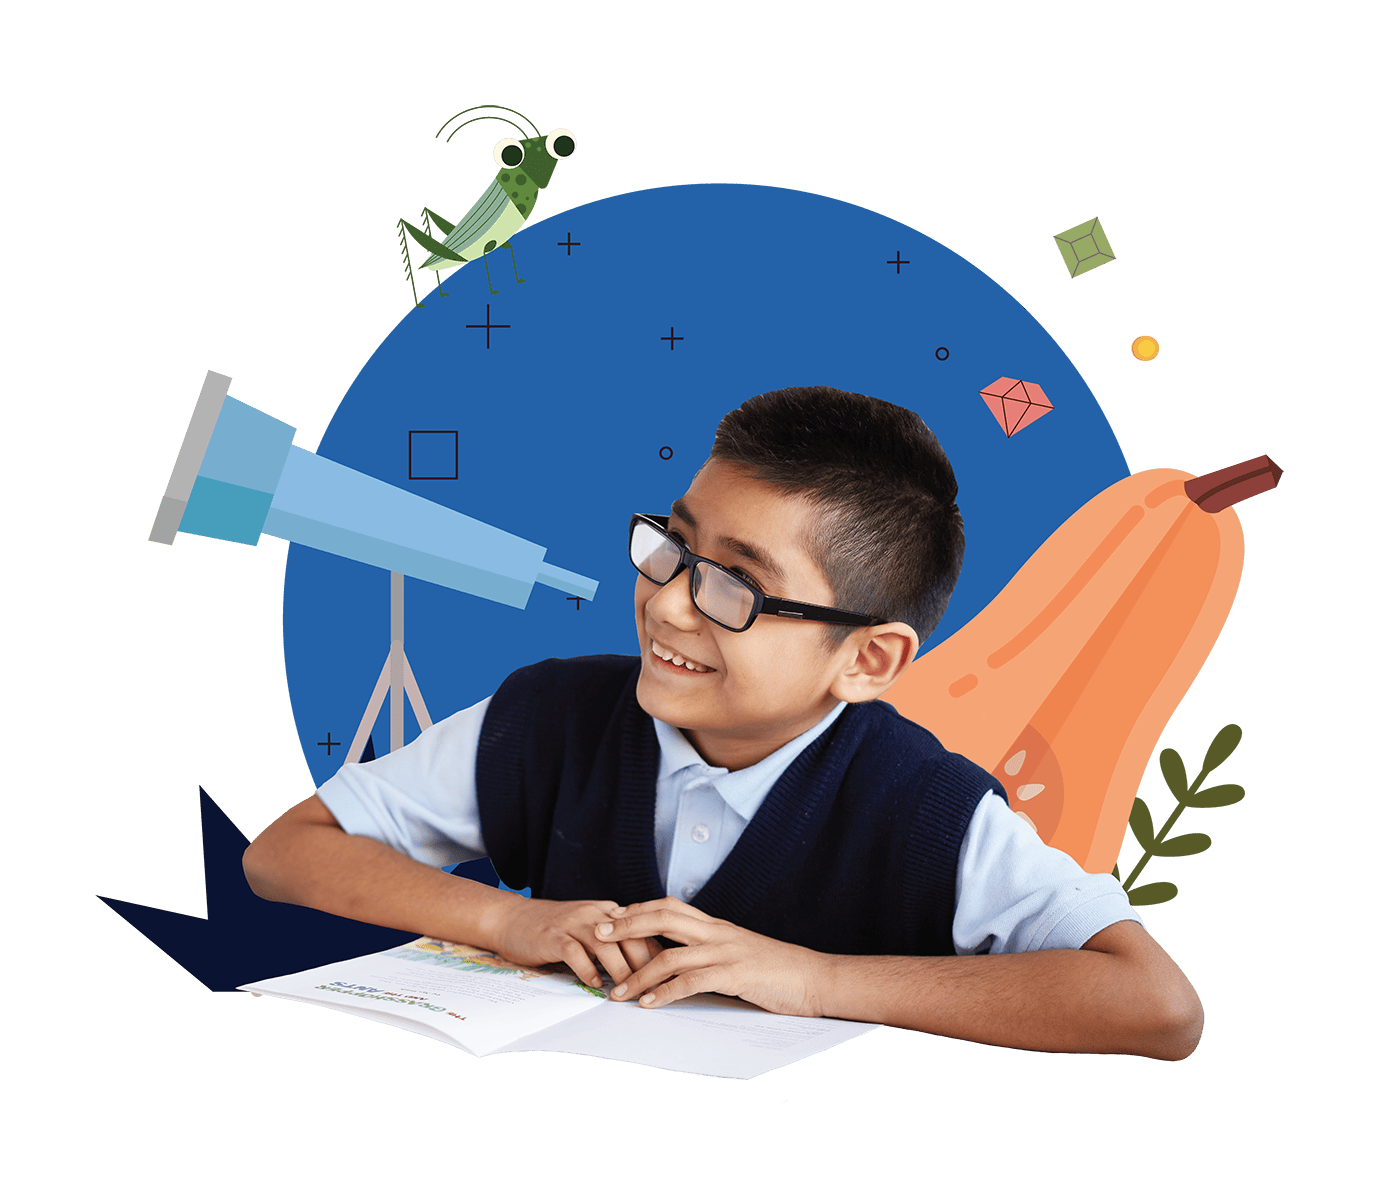 A young boy wearing glasses and a sweater vest smiles while reading a book, with illustrated elements like a telescope and planets surrounding him.